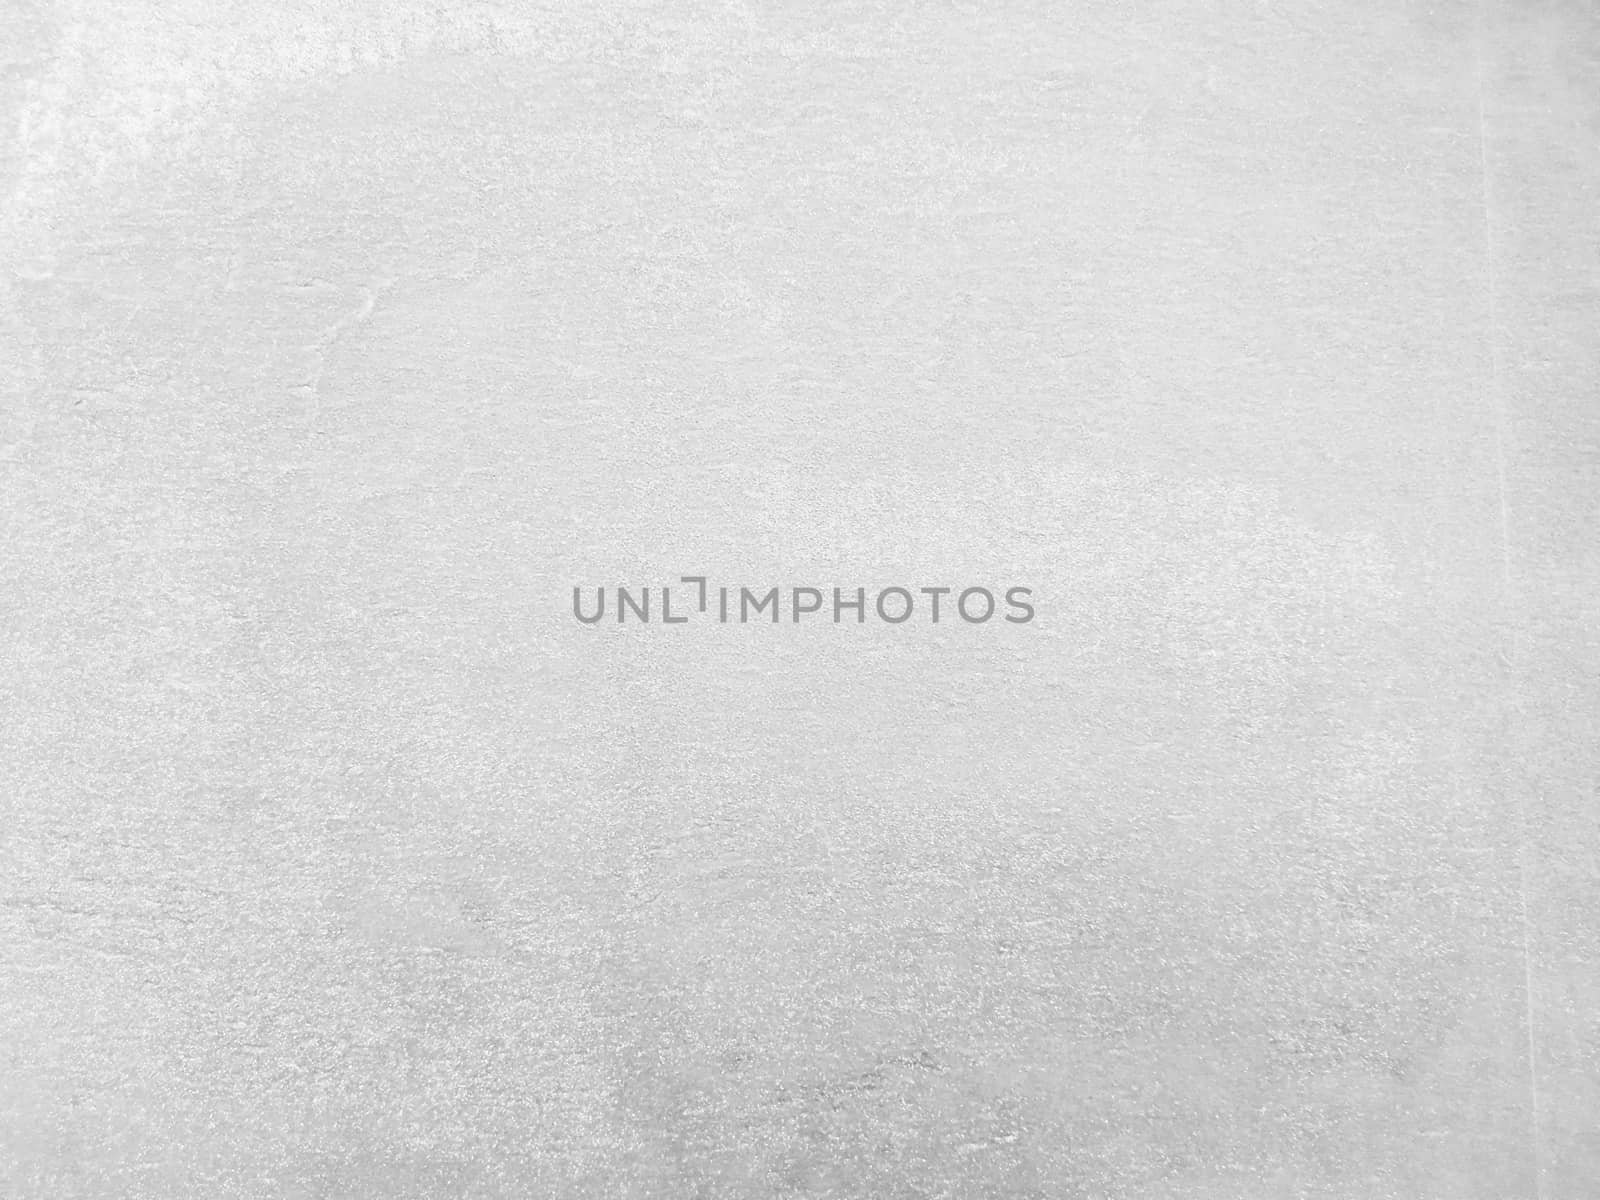 White wallpaper or gray wallpaper texture background. Silver or light grey wallpaper patterns. White color background for graphic contents.